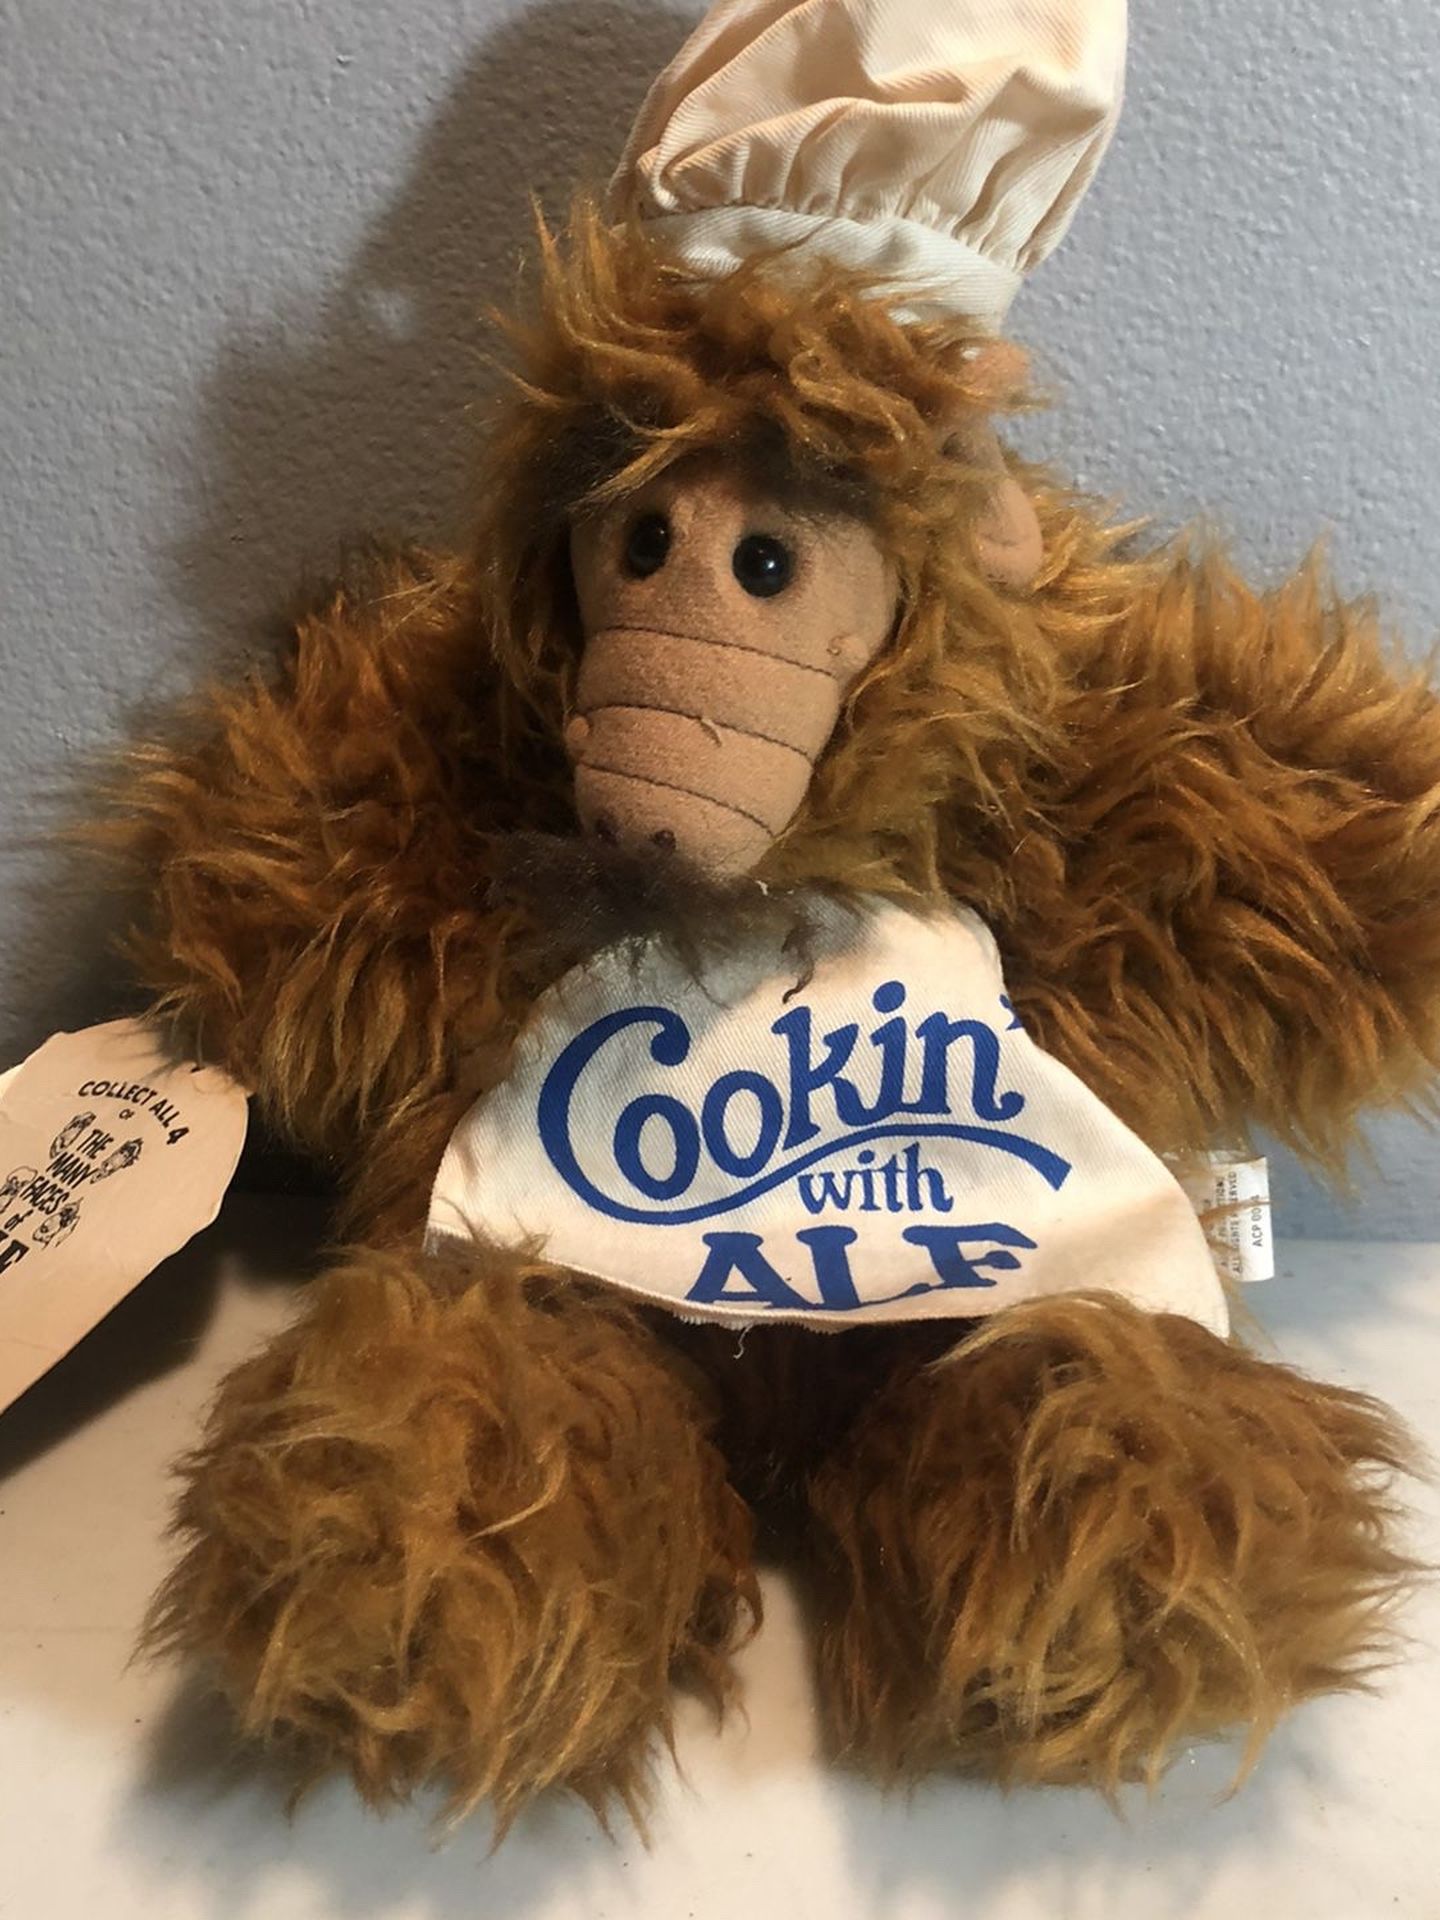 1988 Vintage Alf Puppet From Burger King Rare Collectible